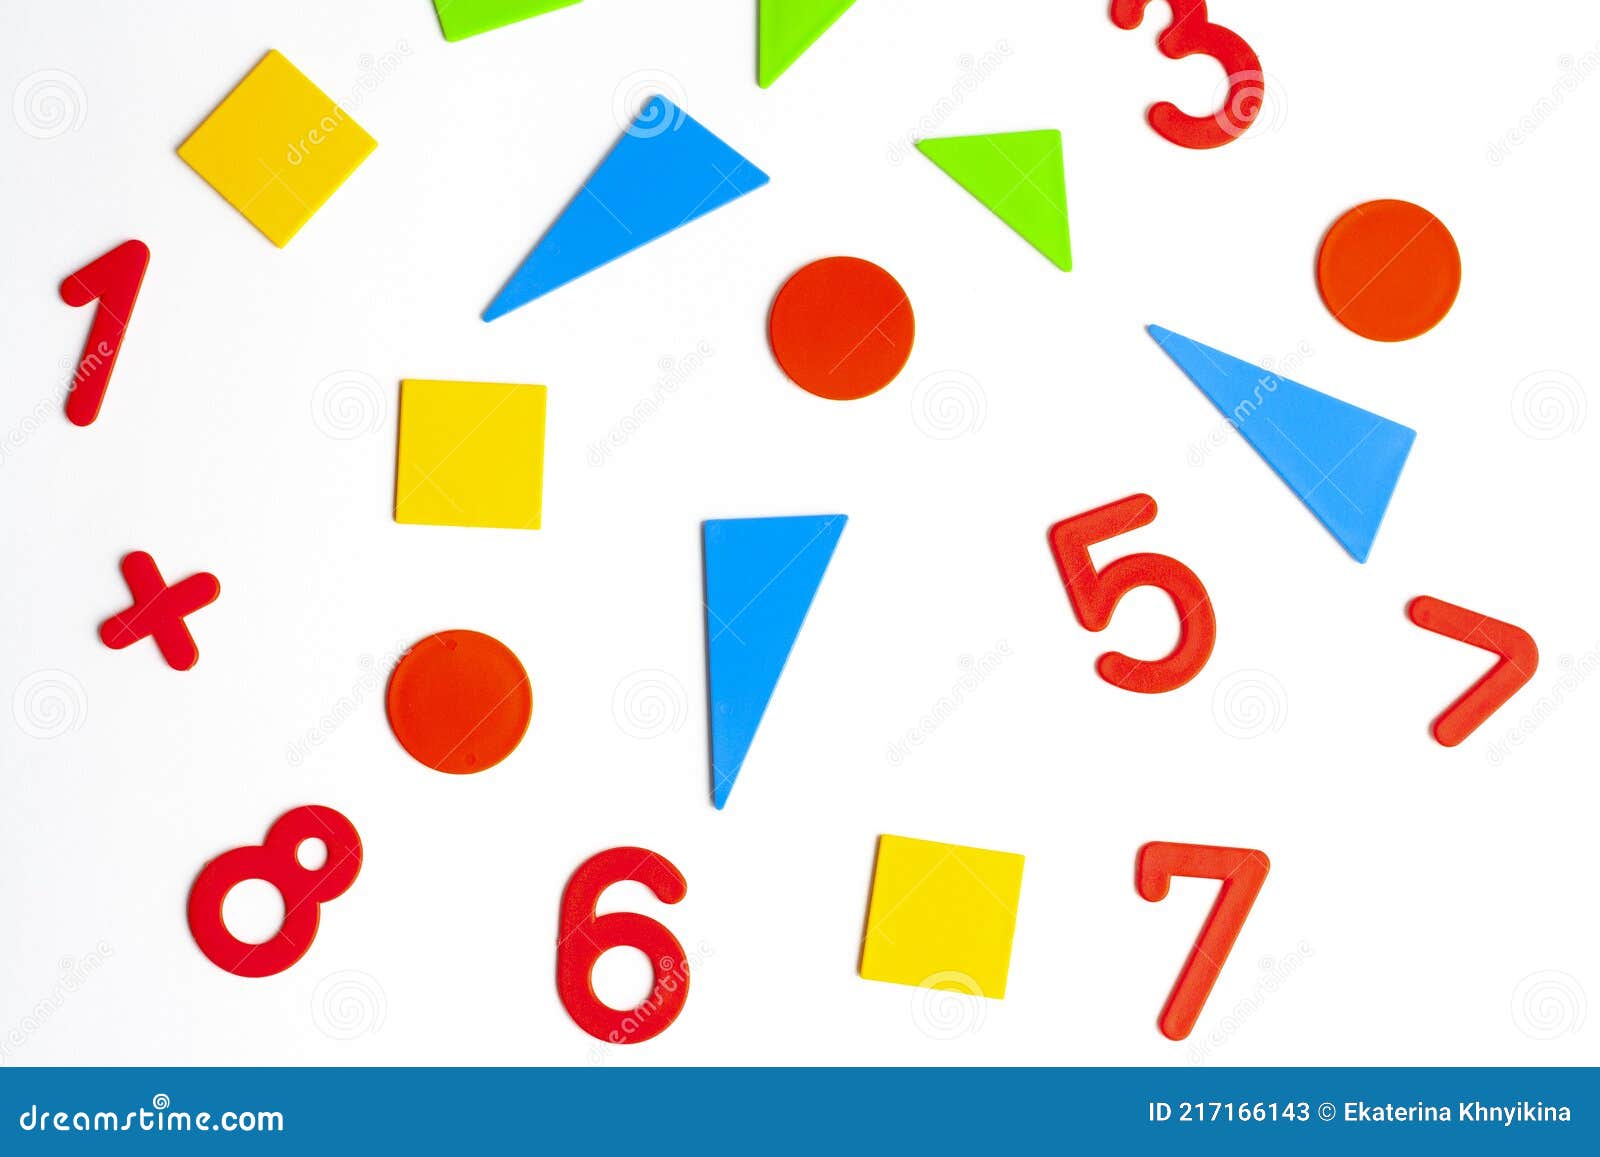 math-geometric-shapes-of-different-colors-and-numbers-on-a-white